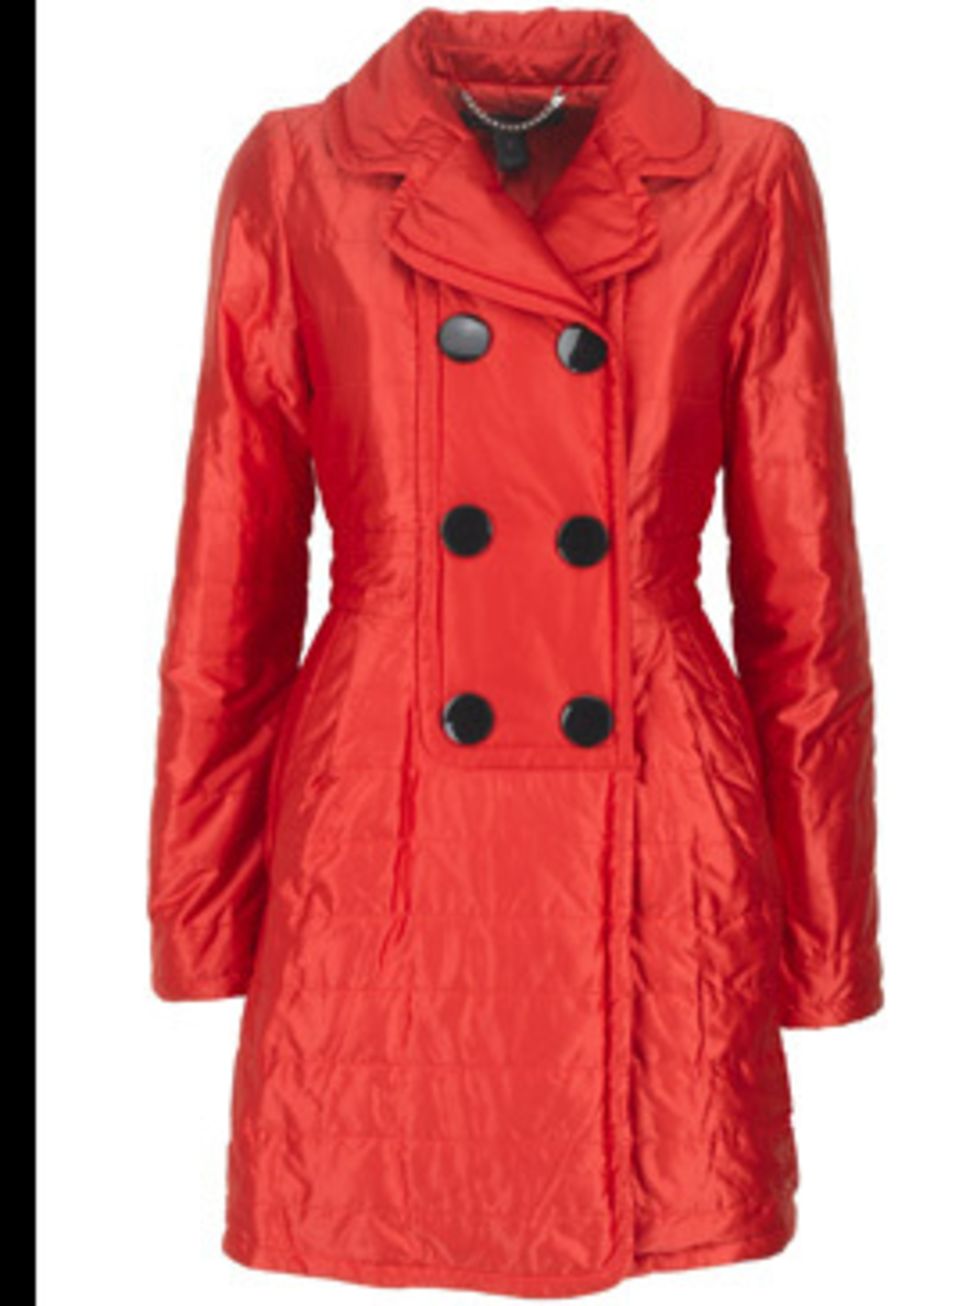 <p>Red satin puff coat £385 by Marc by Marc Jacobs, available from Selfridges 0800 123 400</p>